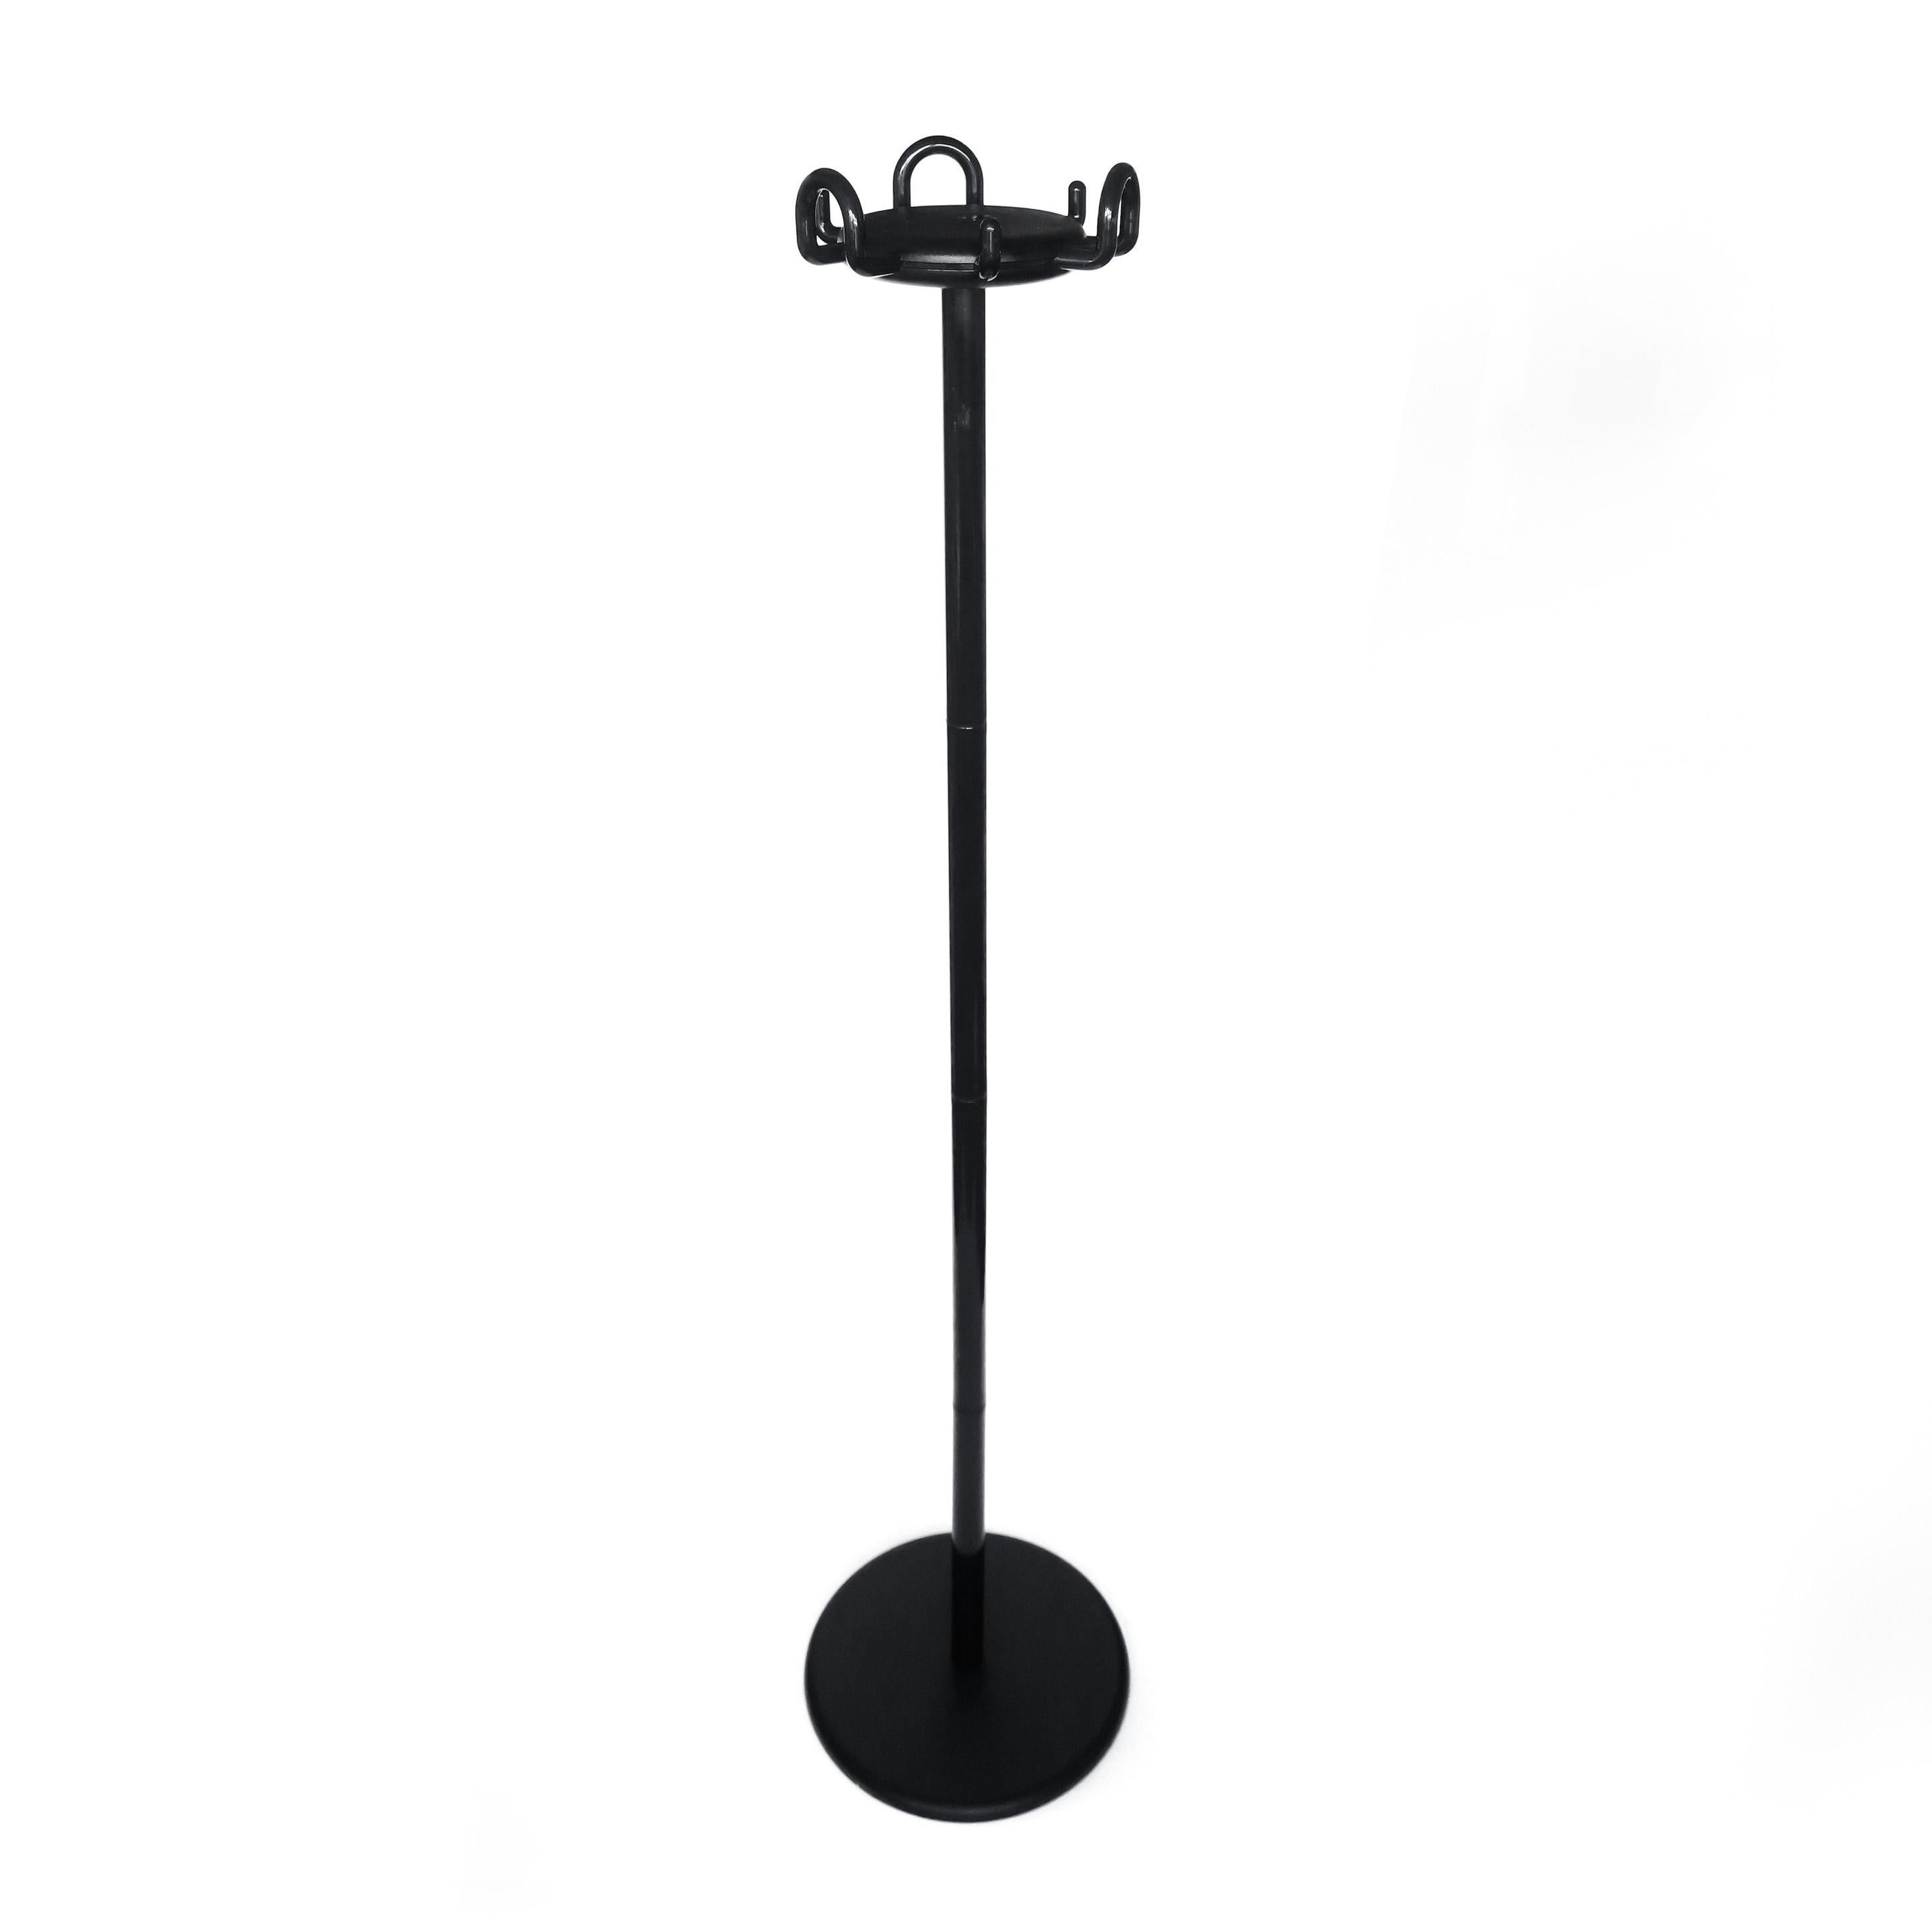 A classic and always fashionable black Aiuto coat stand designed by Raul Barberi and Giorgio Marianelli for Rexite in 1982 as the company's first coat rack. Black steel base, black polymer coated metal stem, with multiple polymer coated metal hooks